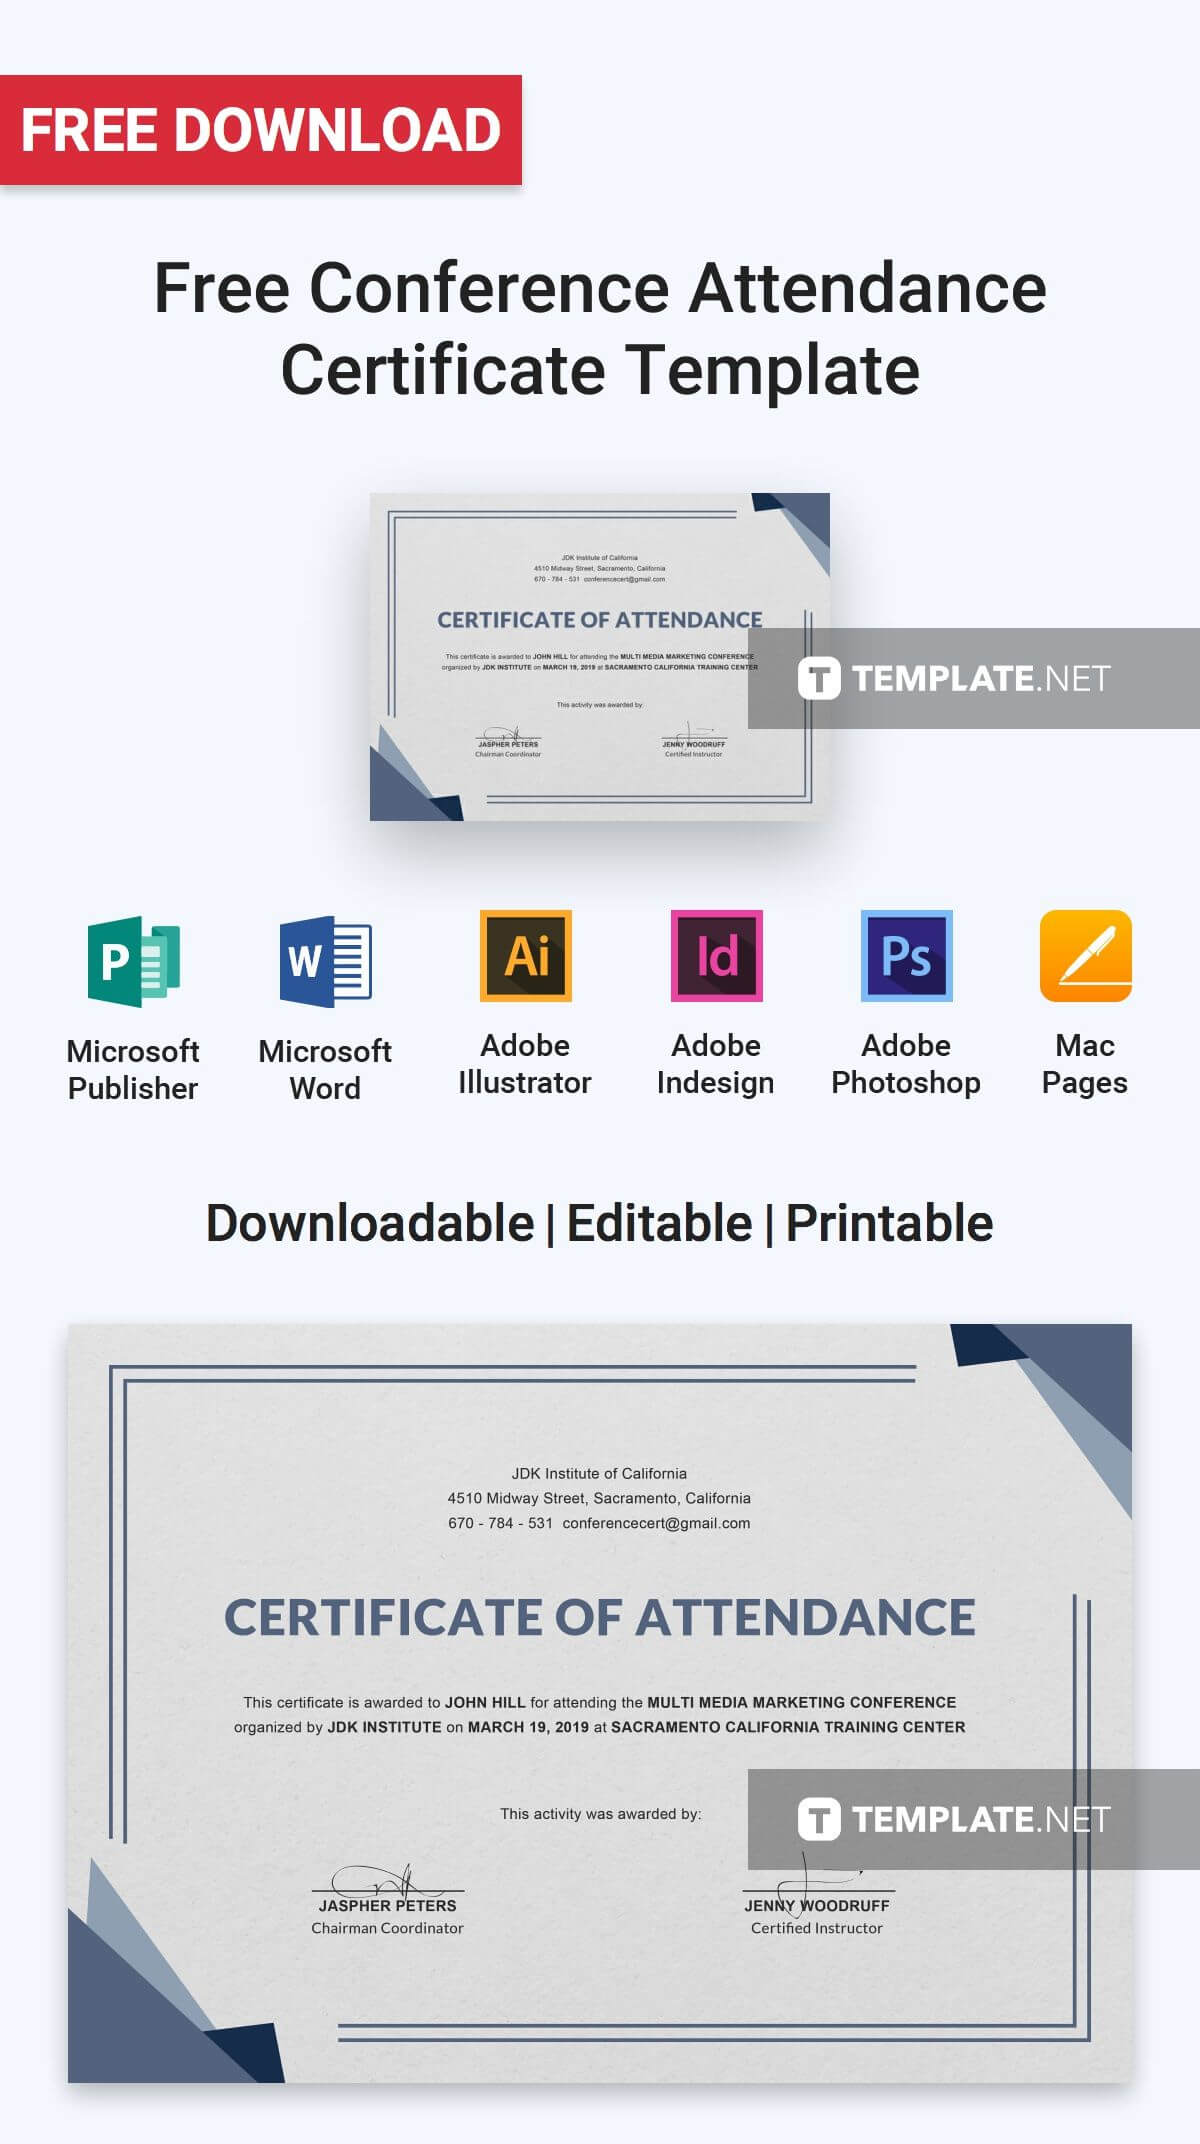 Free Conference Attendance Certificate | Certificate With Regard To Free Swimming Certificate Templates